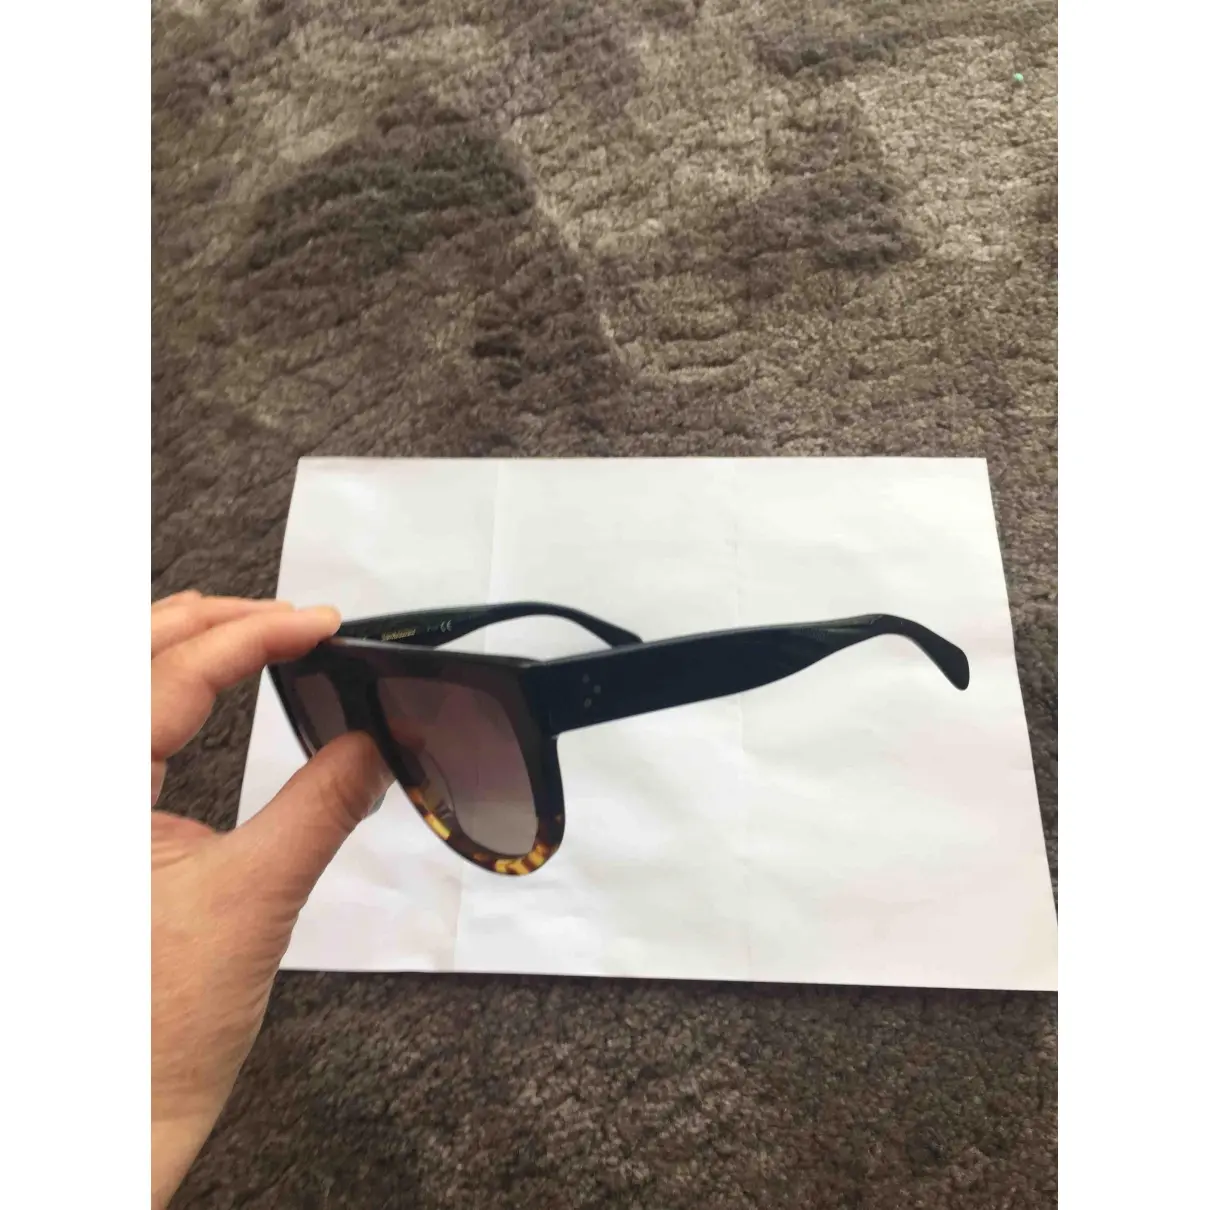 Celine Shadow goggle glasses for sale